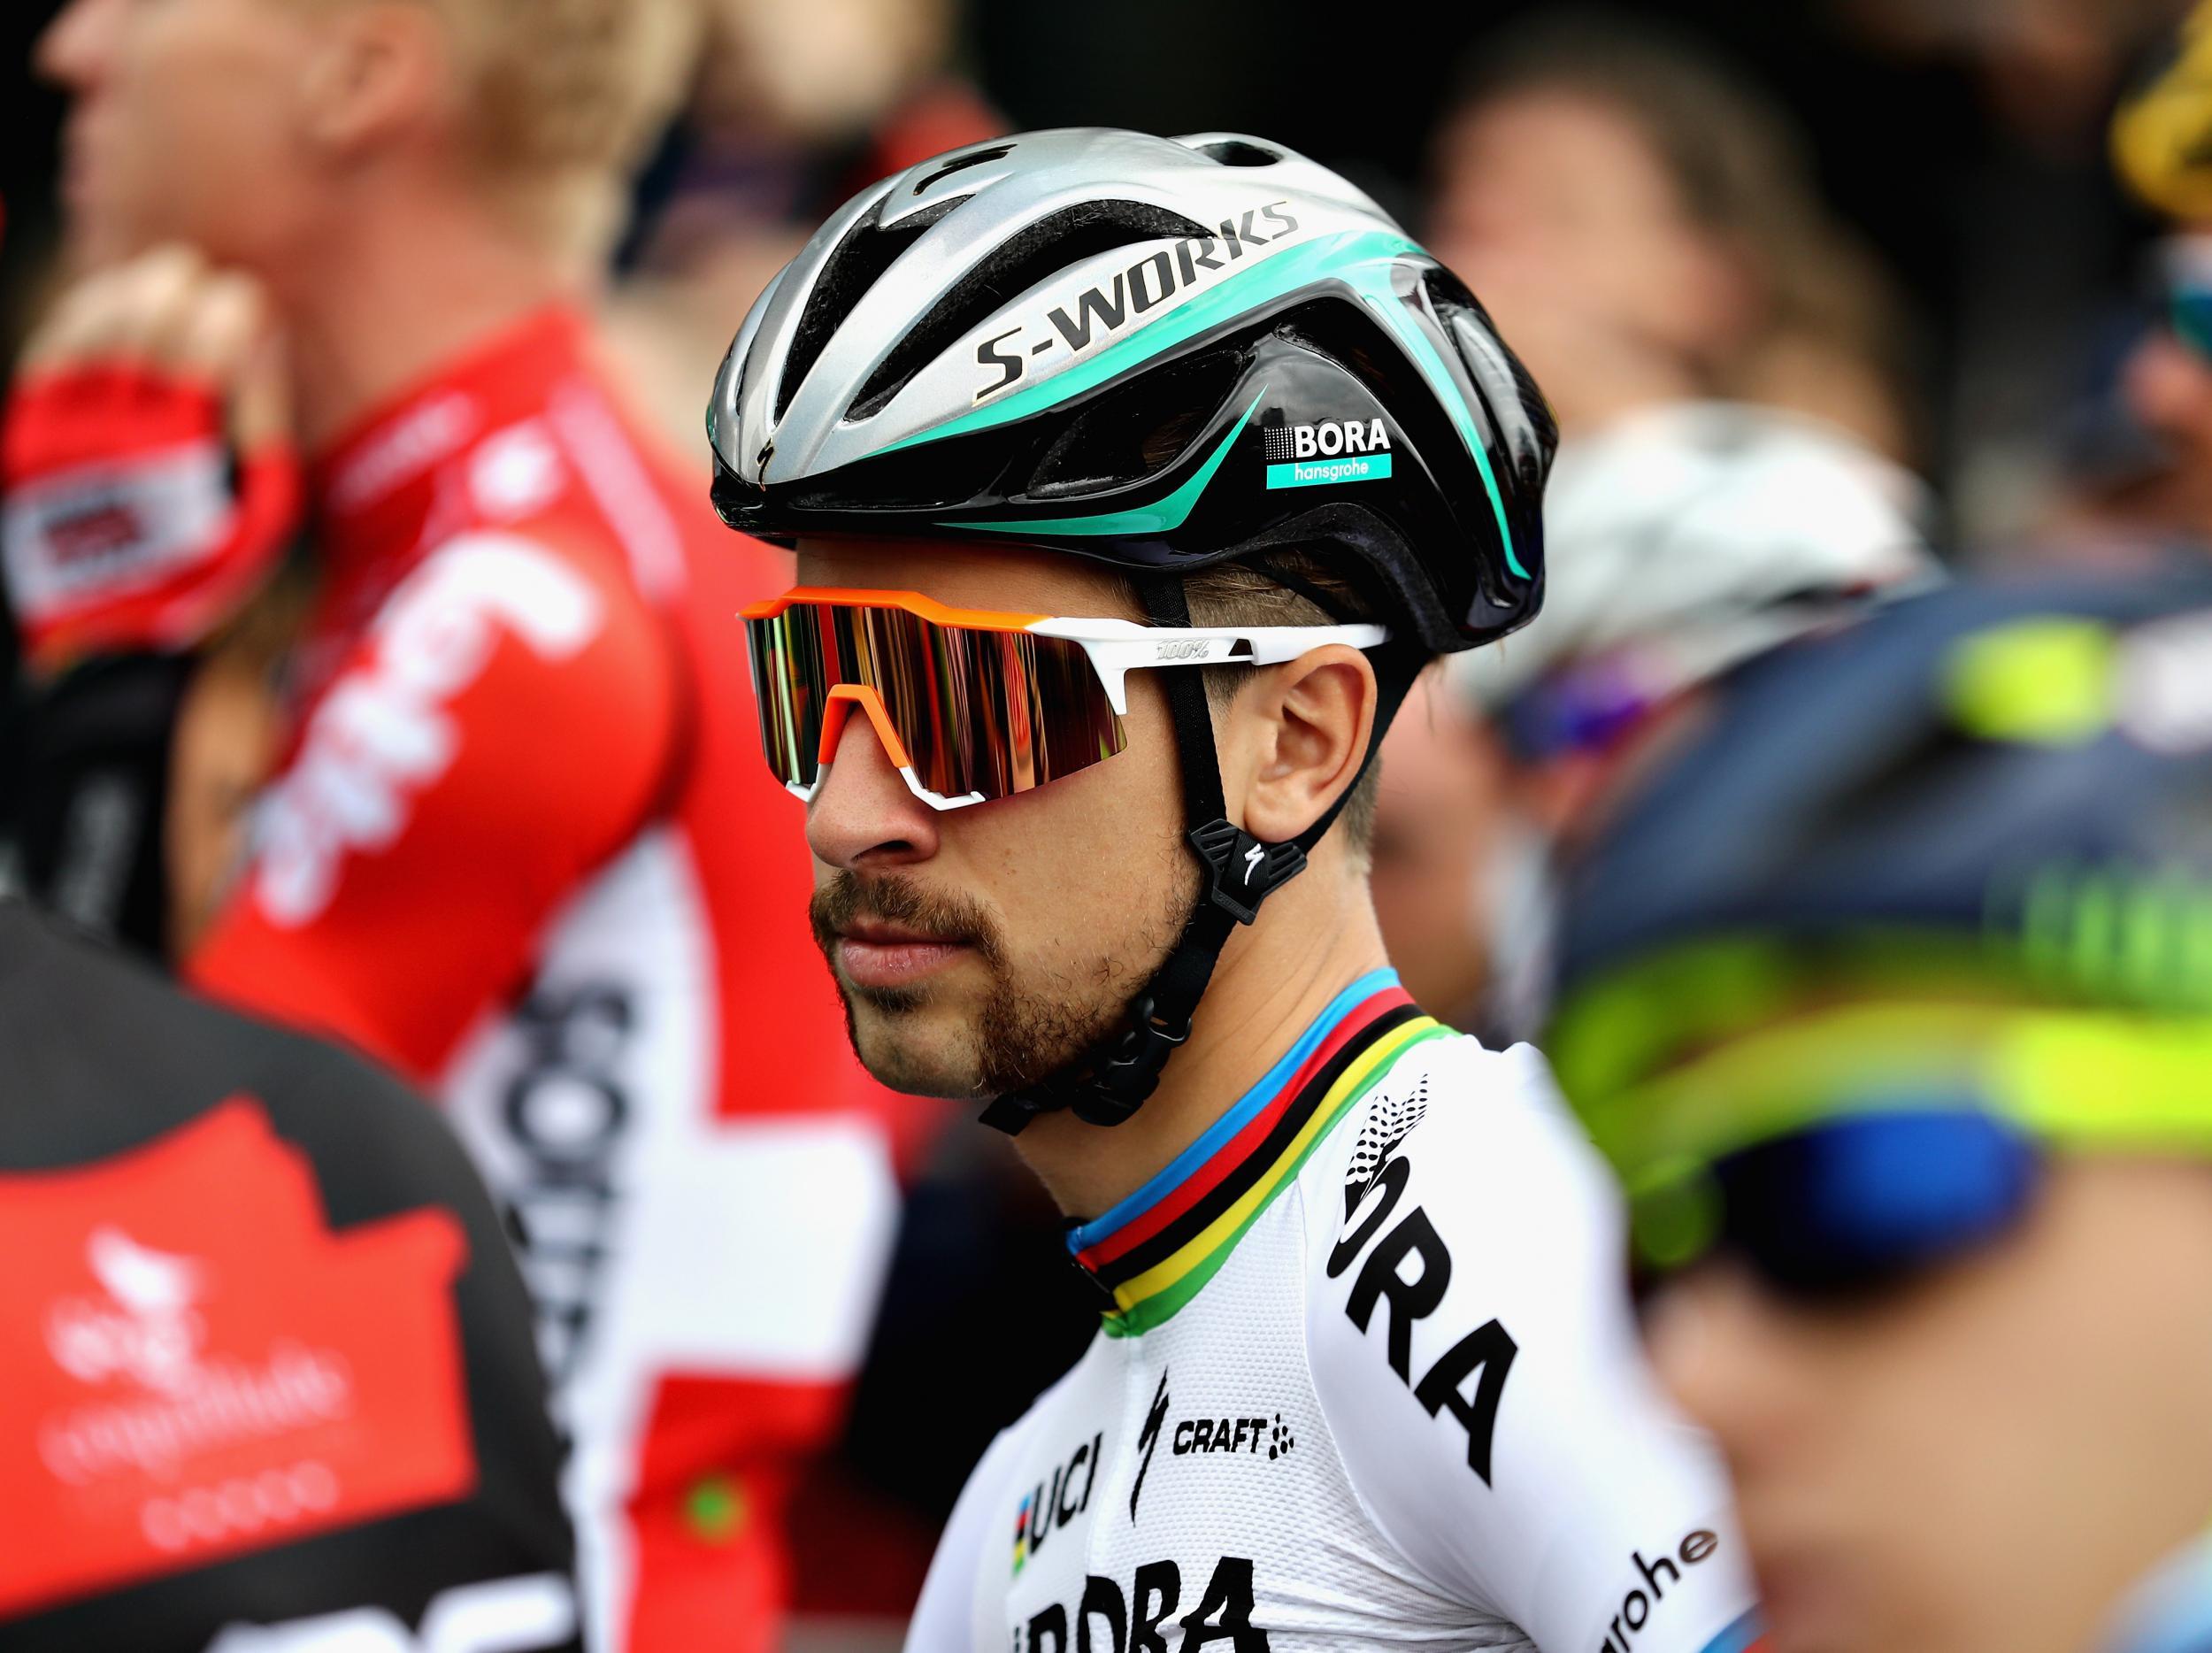 Peter Sagan appeals disqualification from the 2017 Tour de